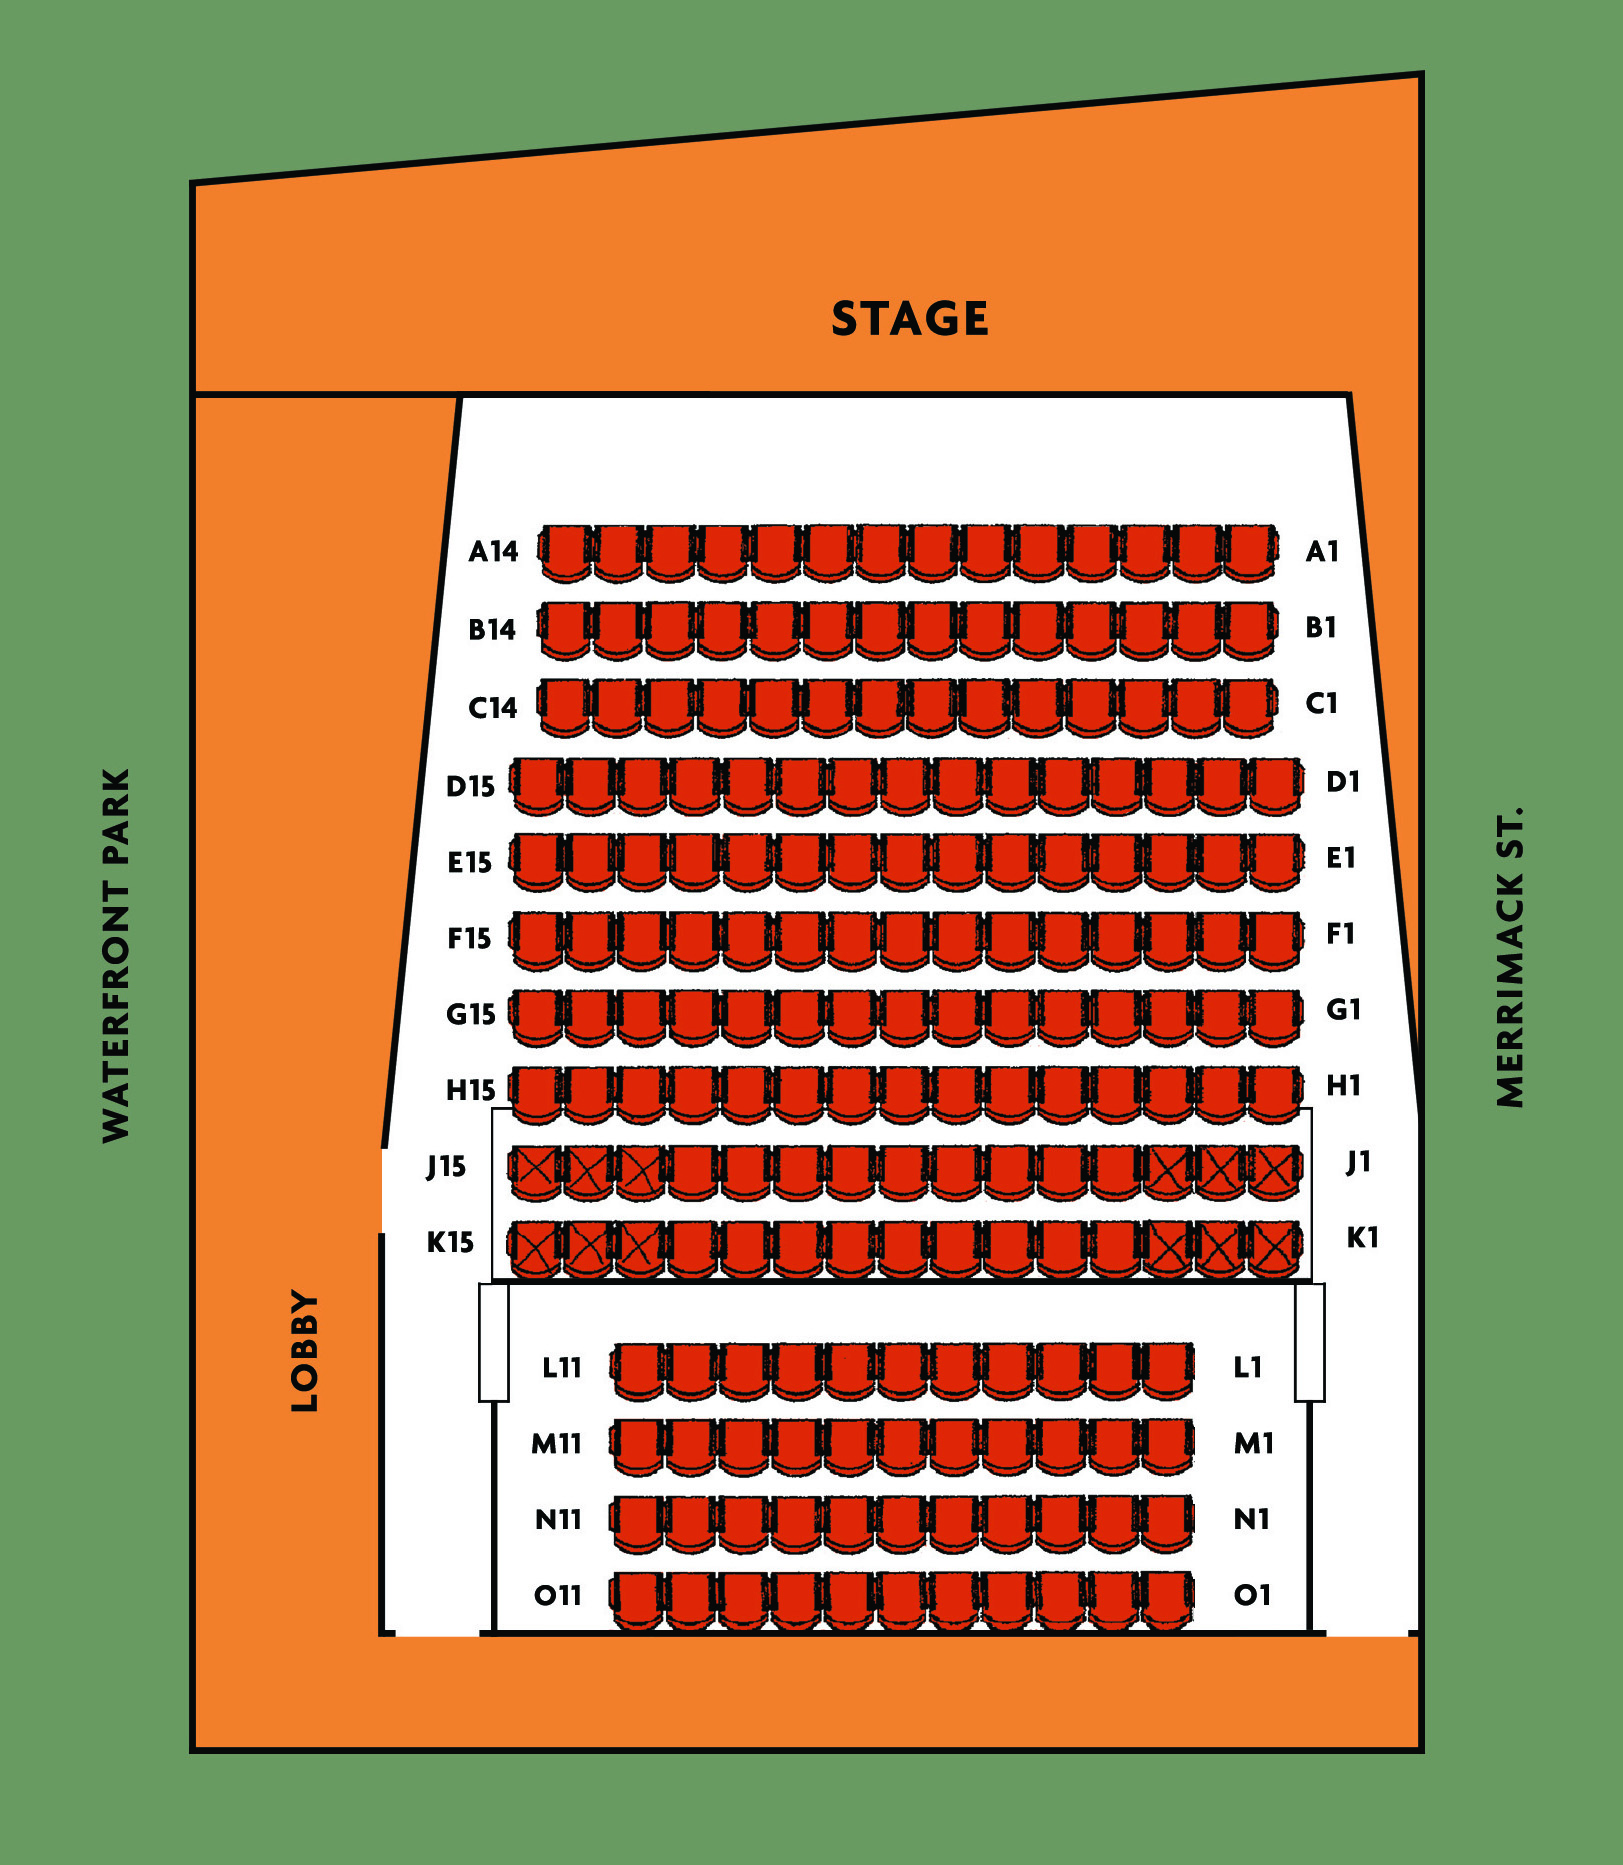 California Center For The Arts Seating Chart